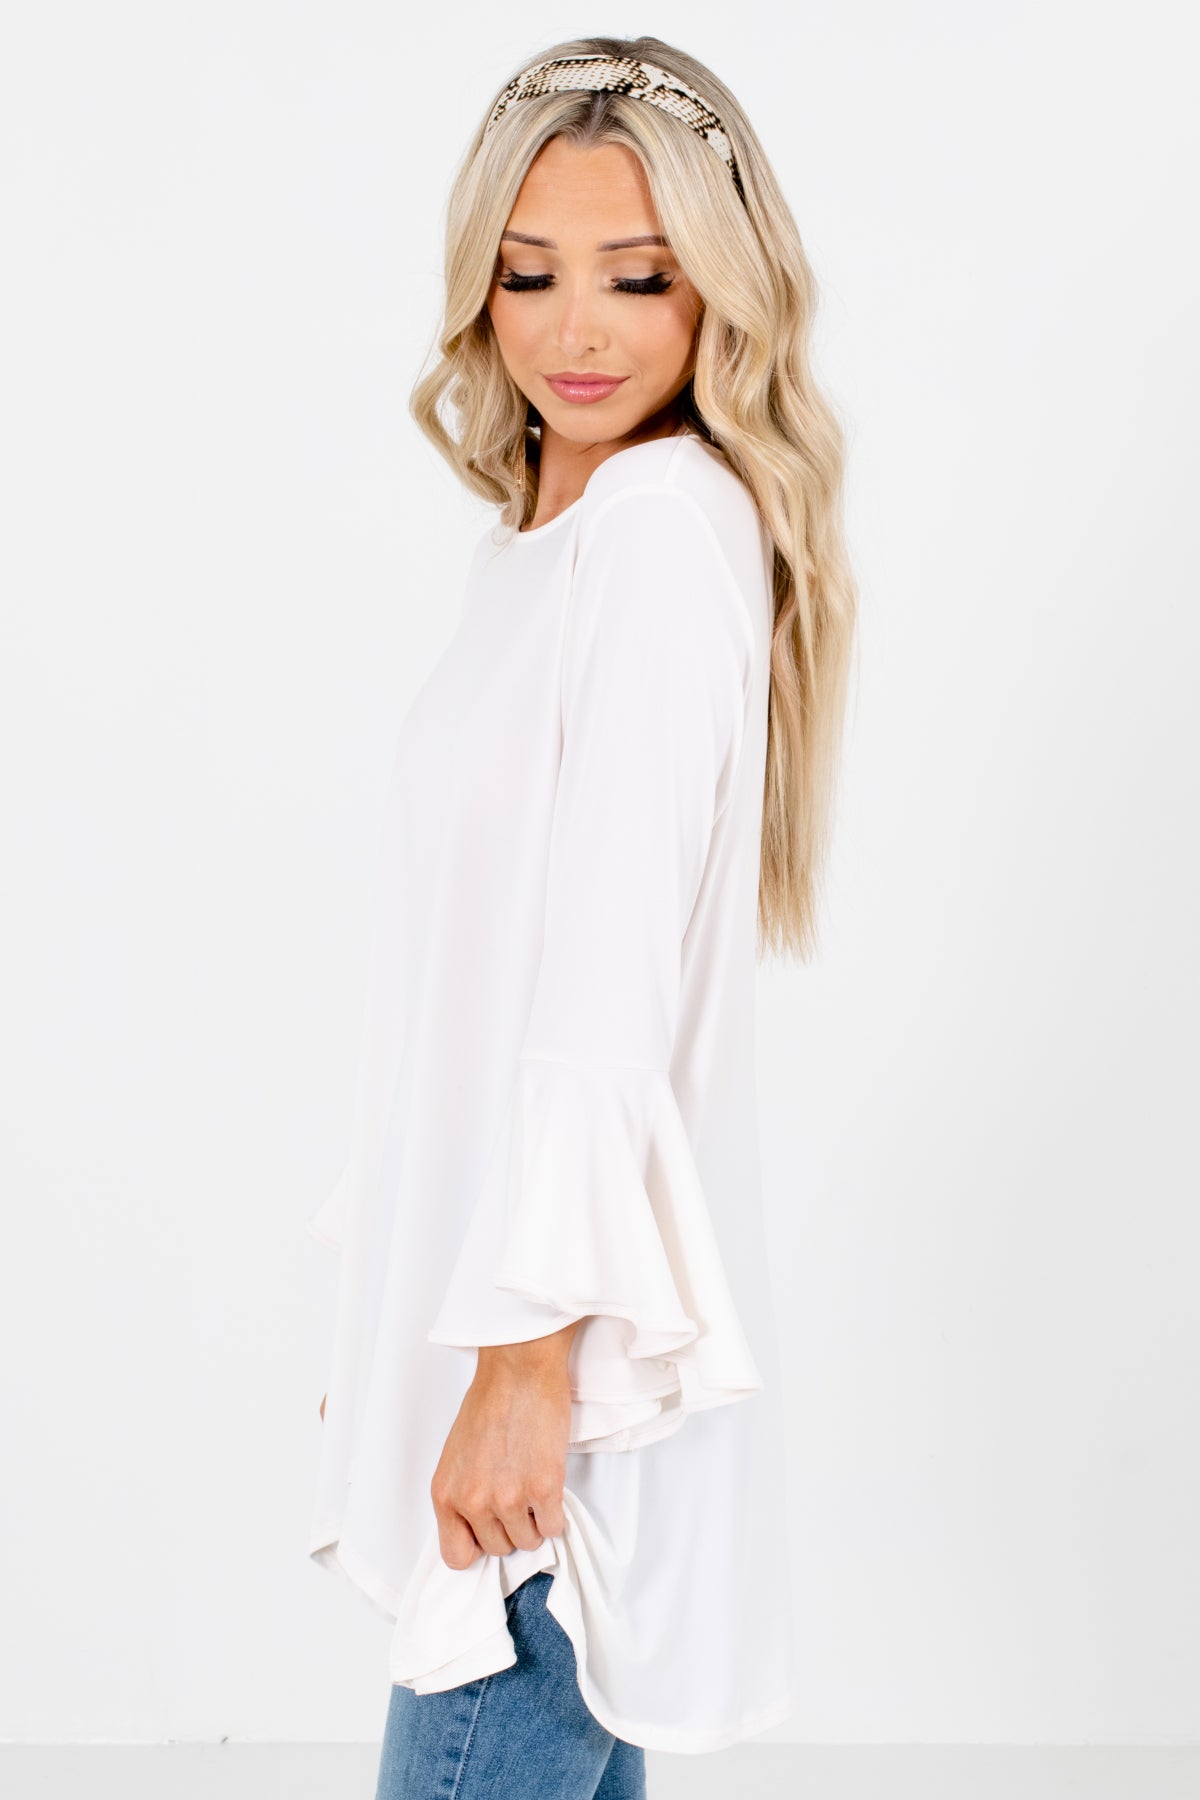 Women's White High-Quality Material Boutique Blouse